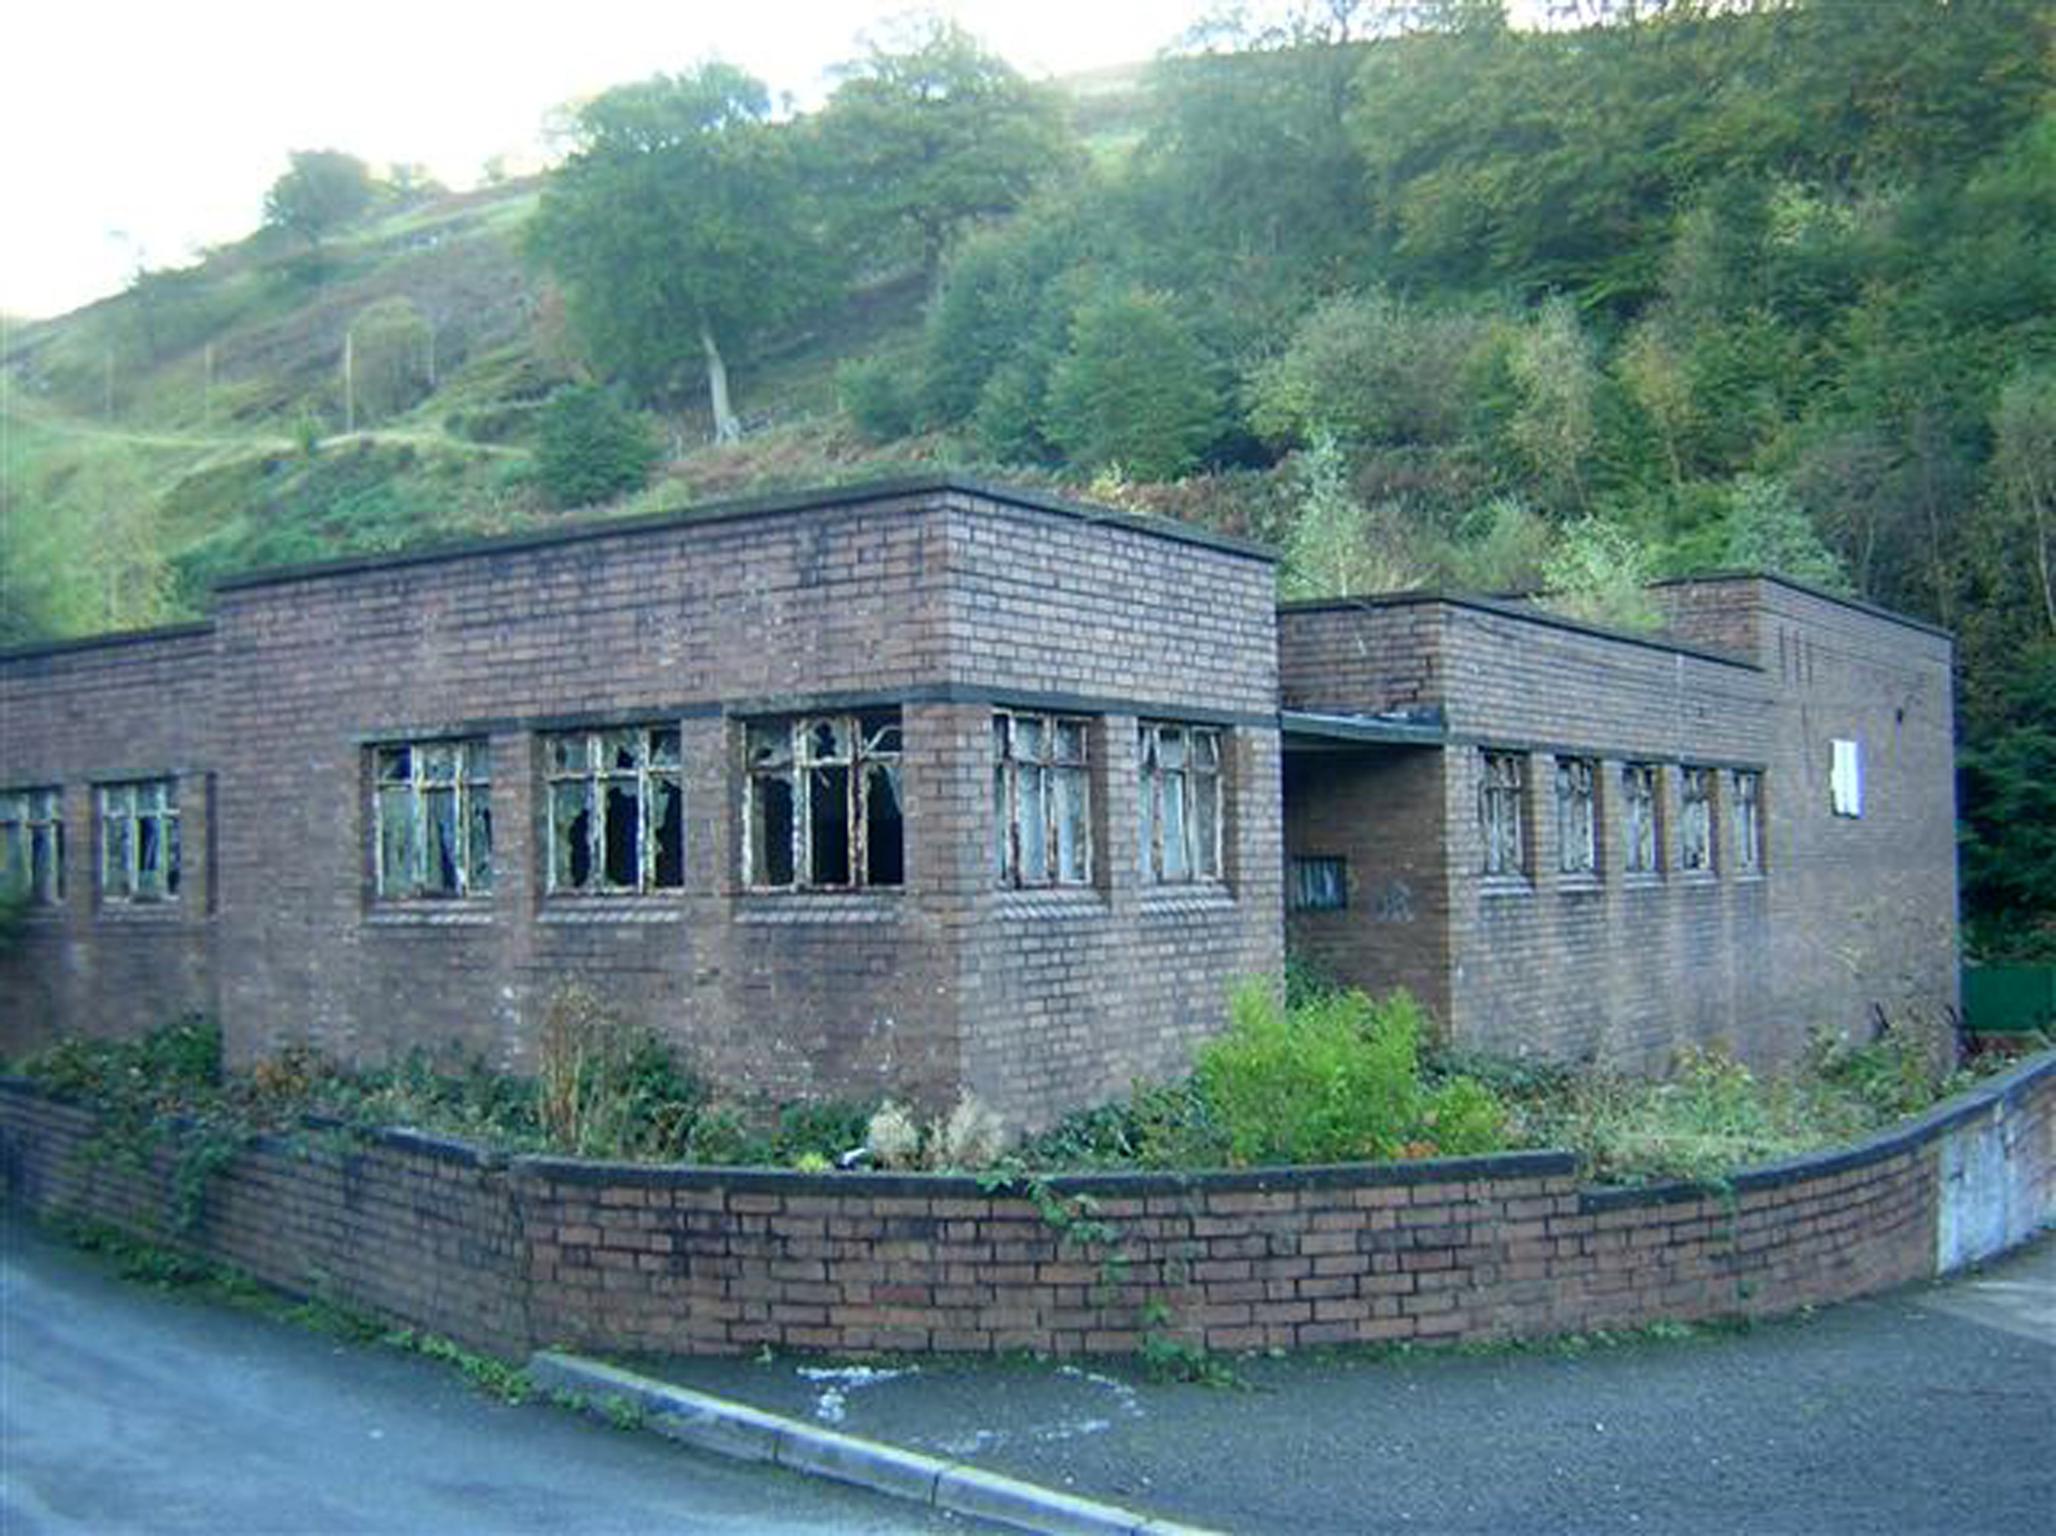 Llanhilleth Colliery, photograph